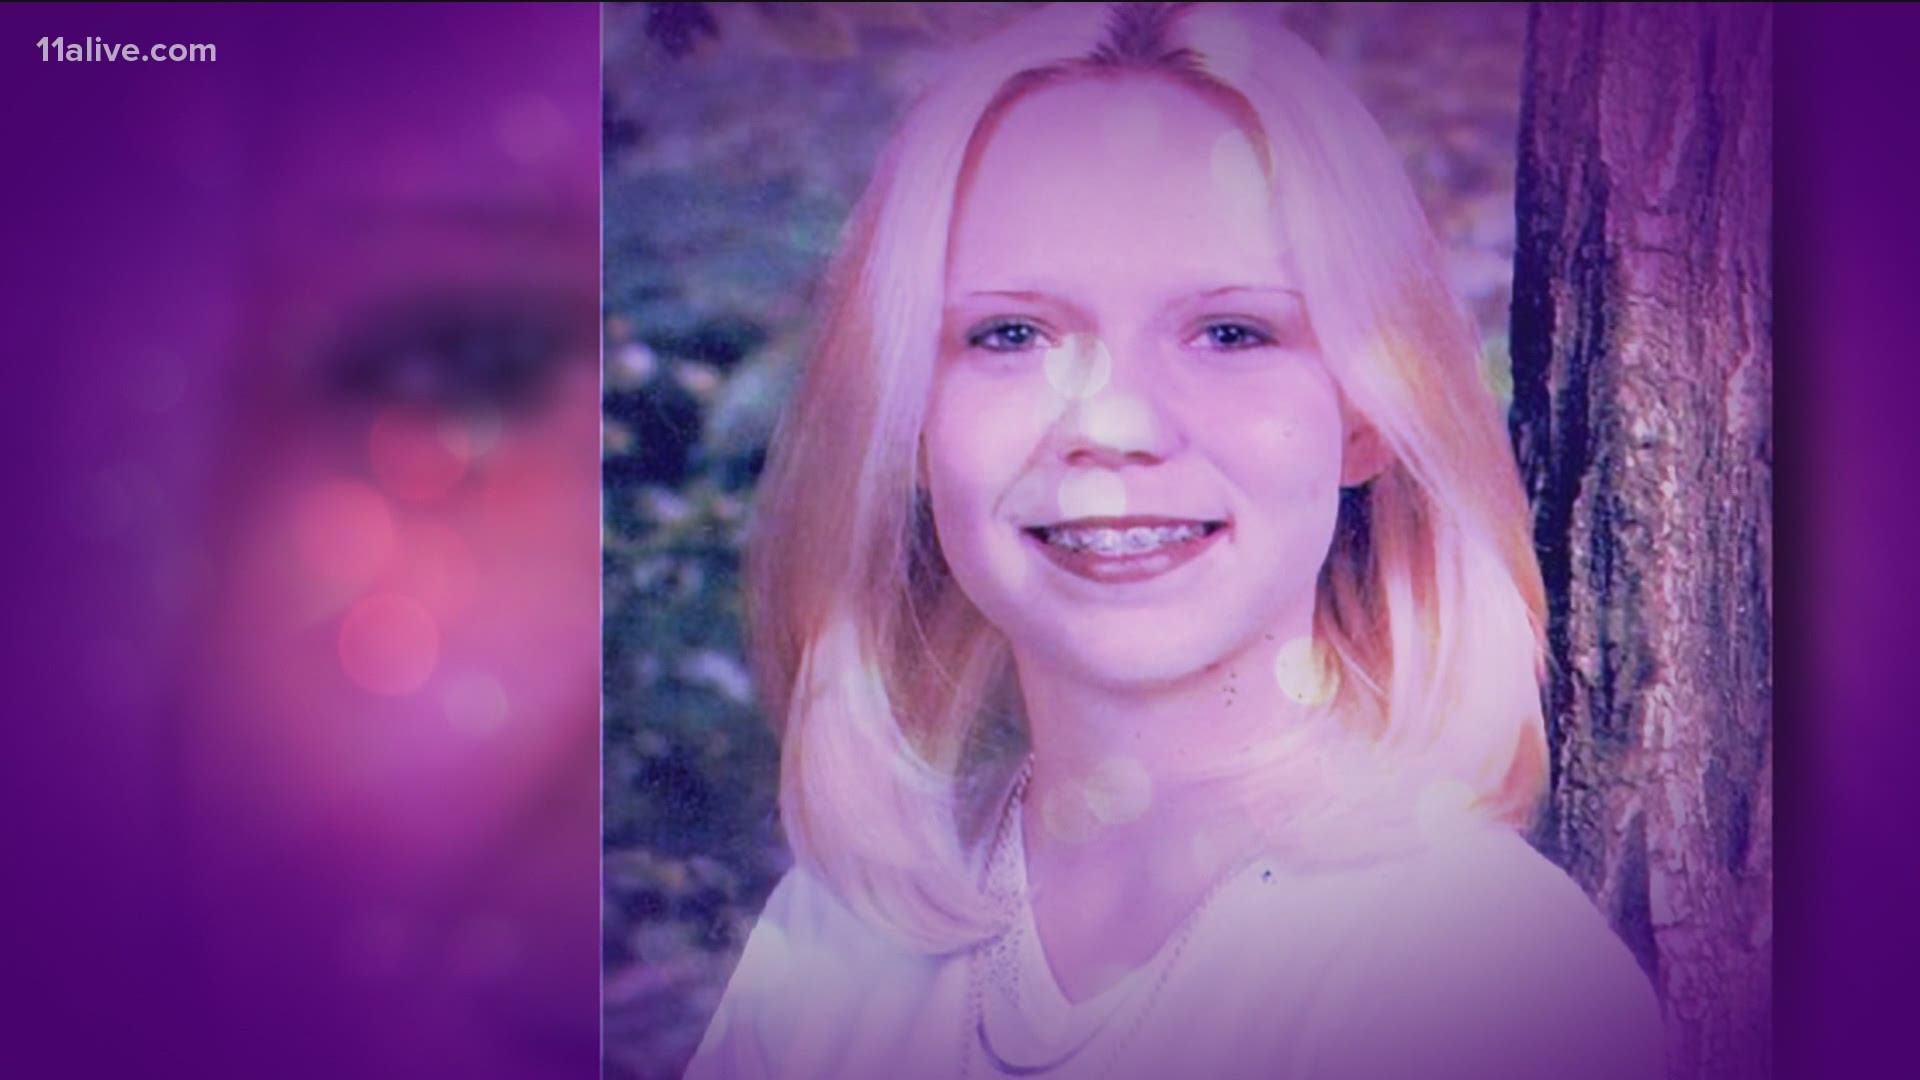 Elaine Nix was just 18 years old when she disappeared in September, 1999. After nine days, on September 29, her nude body was found.